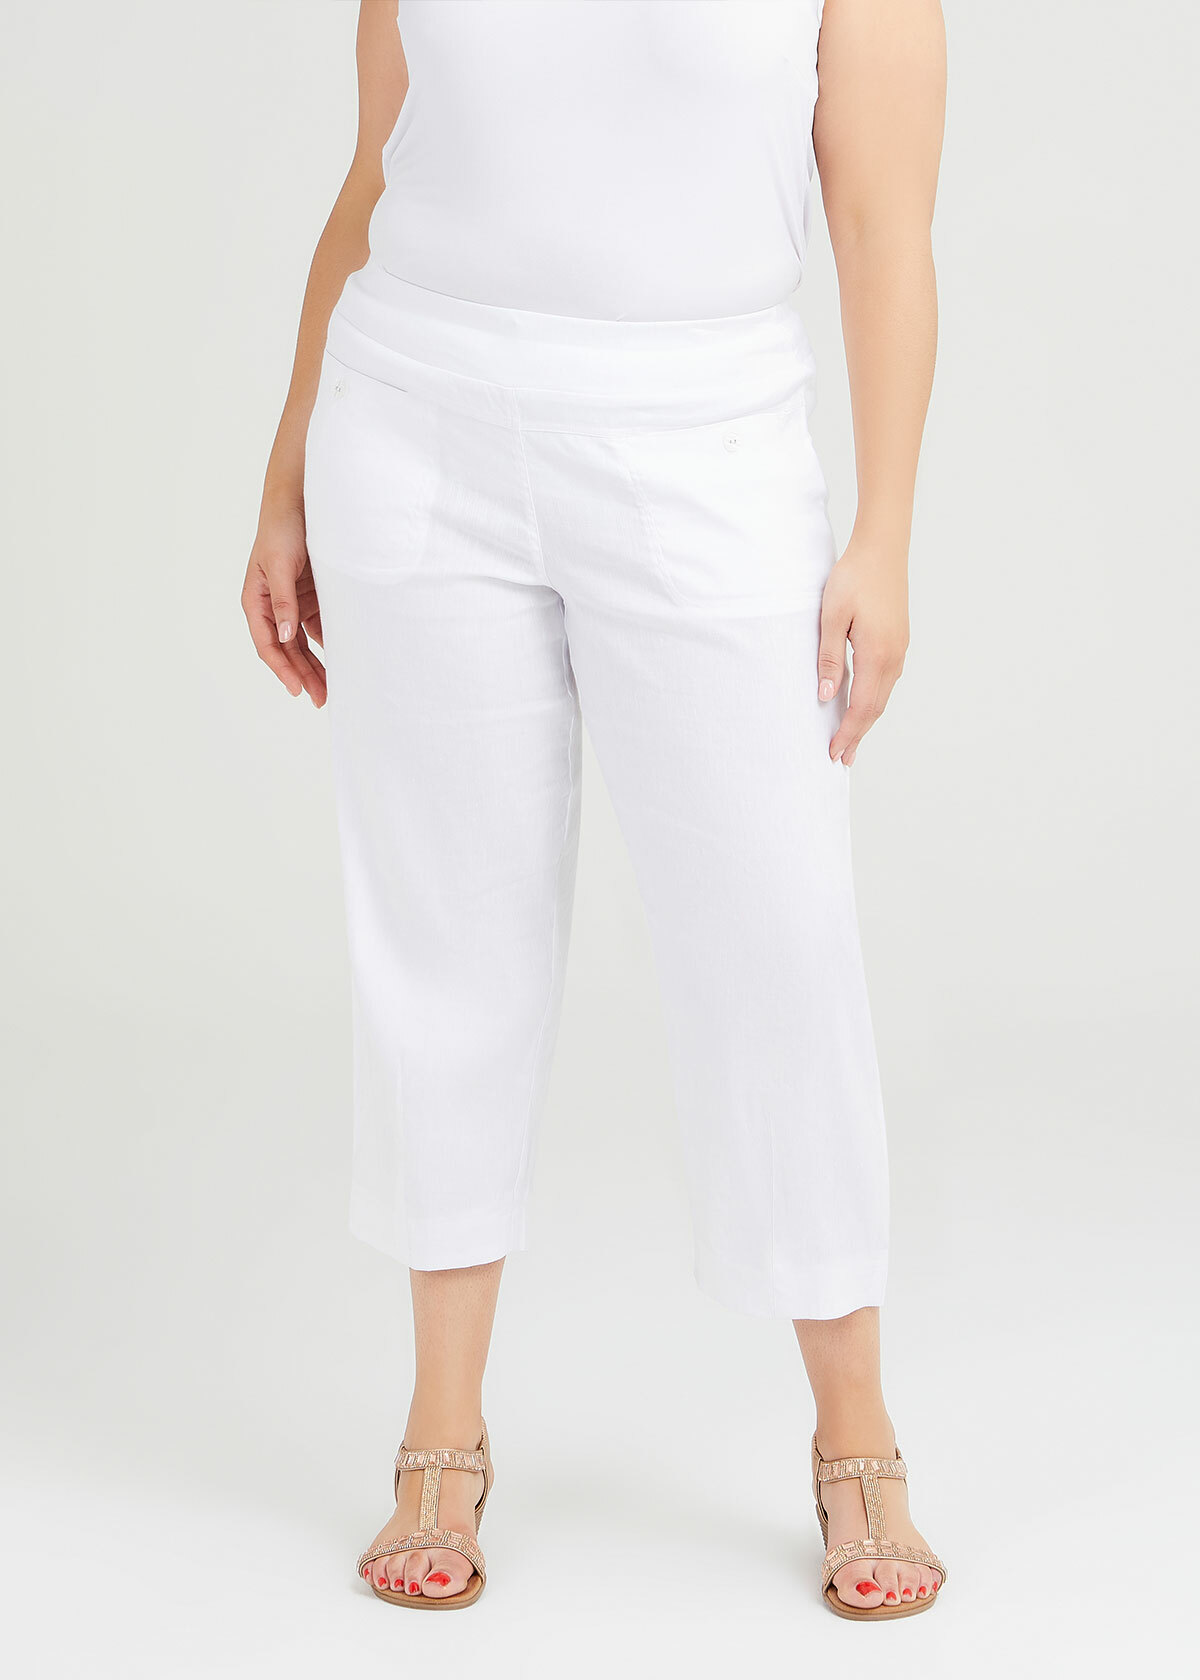 Shop Plus Size Linen Stretch Ana Crop Pant in White | Sizes 12-30 ...